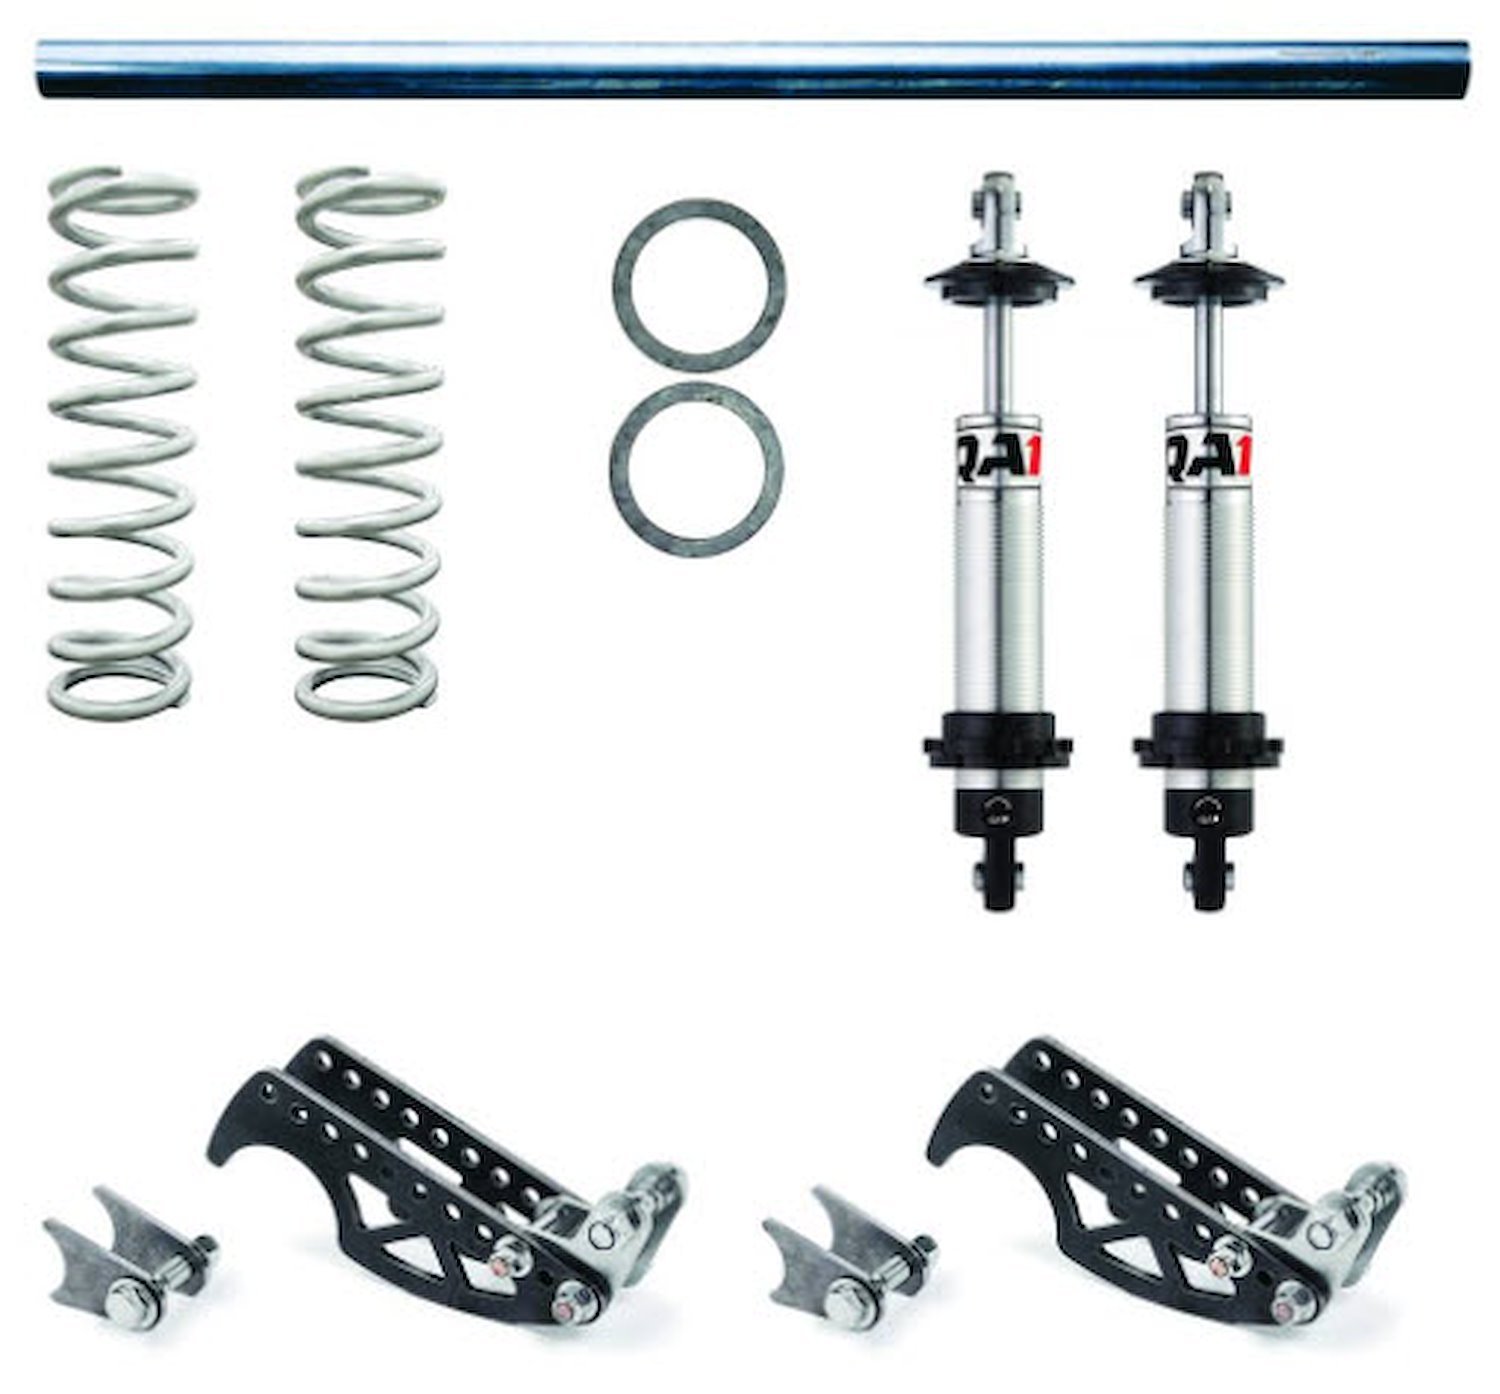 DS501-3001 Heavy-Duty Pro Rear Coil-Over Conversion System for 3 1/4 in. Axle Tubes w/Single-Adjustable Shocks & 300 lb. Springs